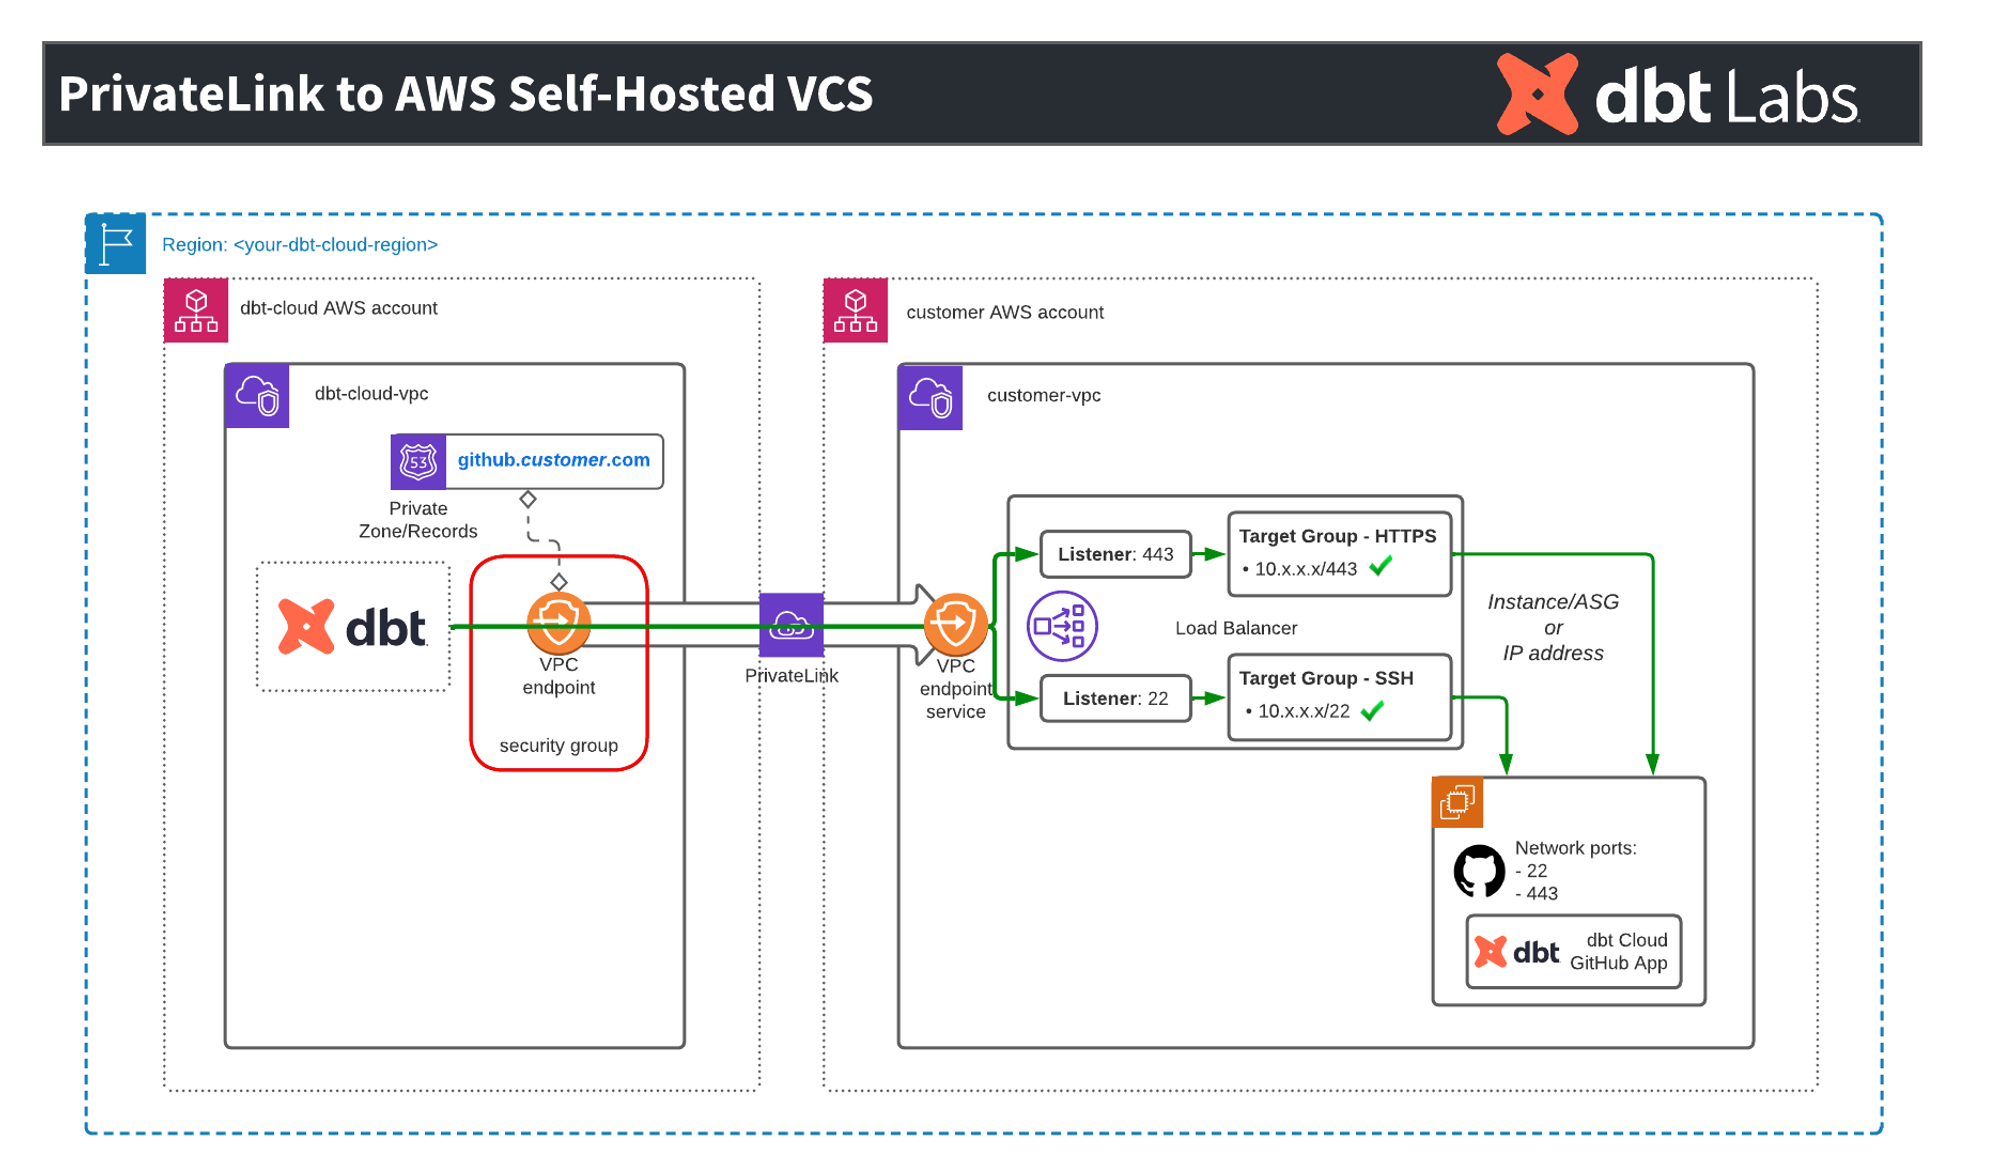 High level overview of the dbt Cloud and AWS PrivateLink for VCS architecture